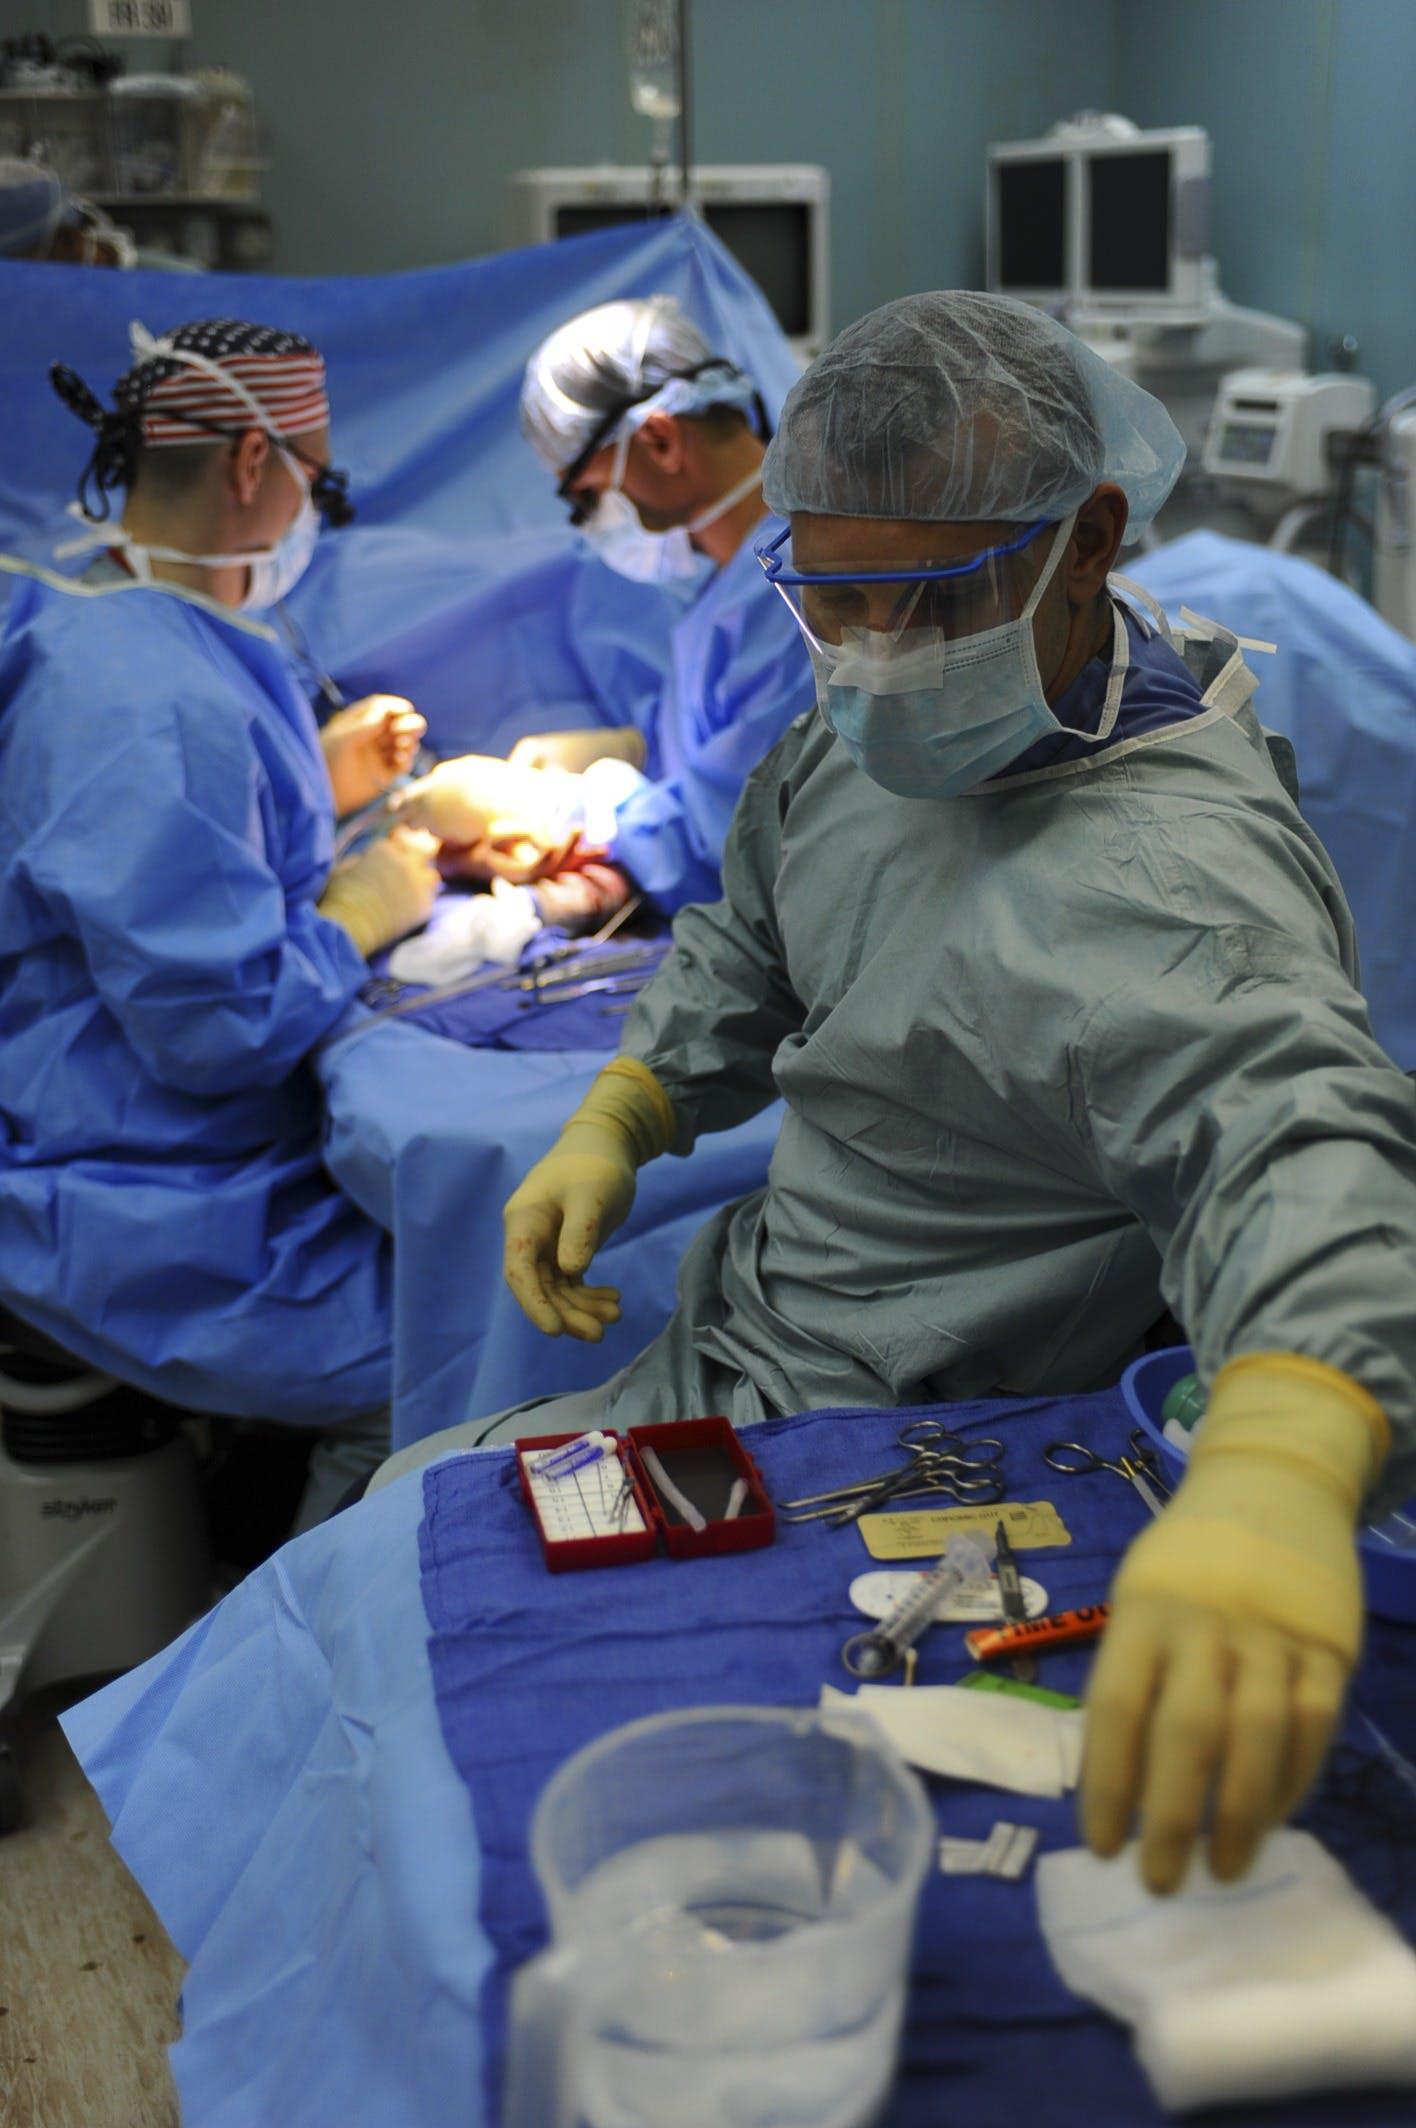 Why do you want to be a surgical technologist? 